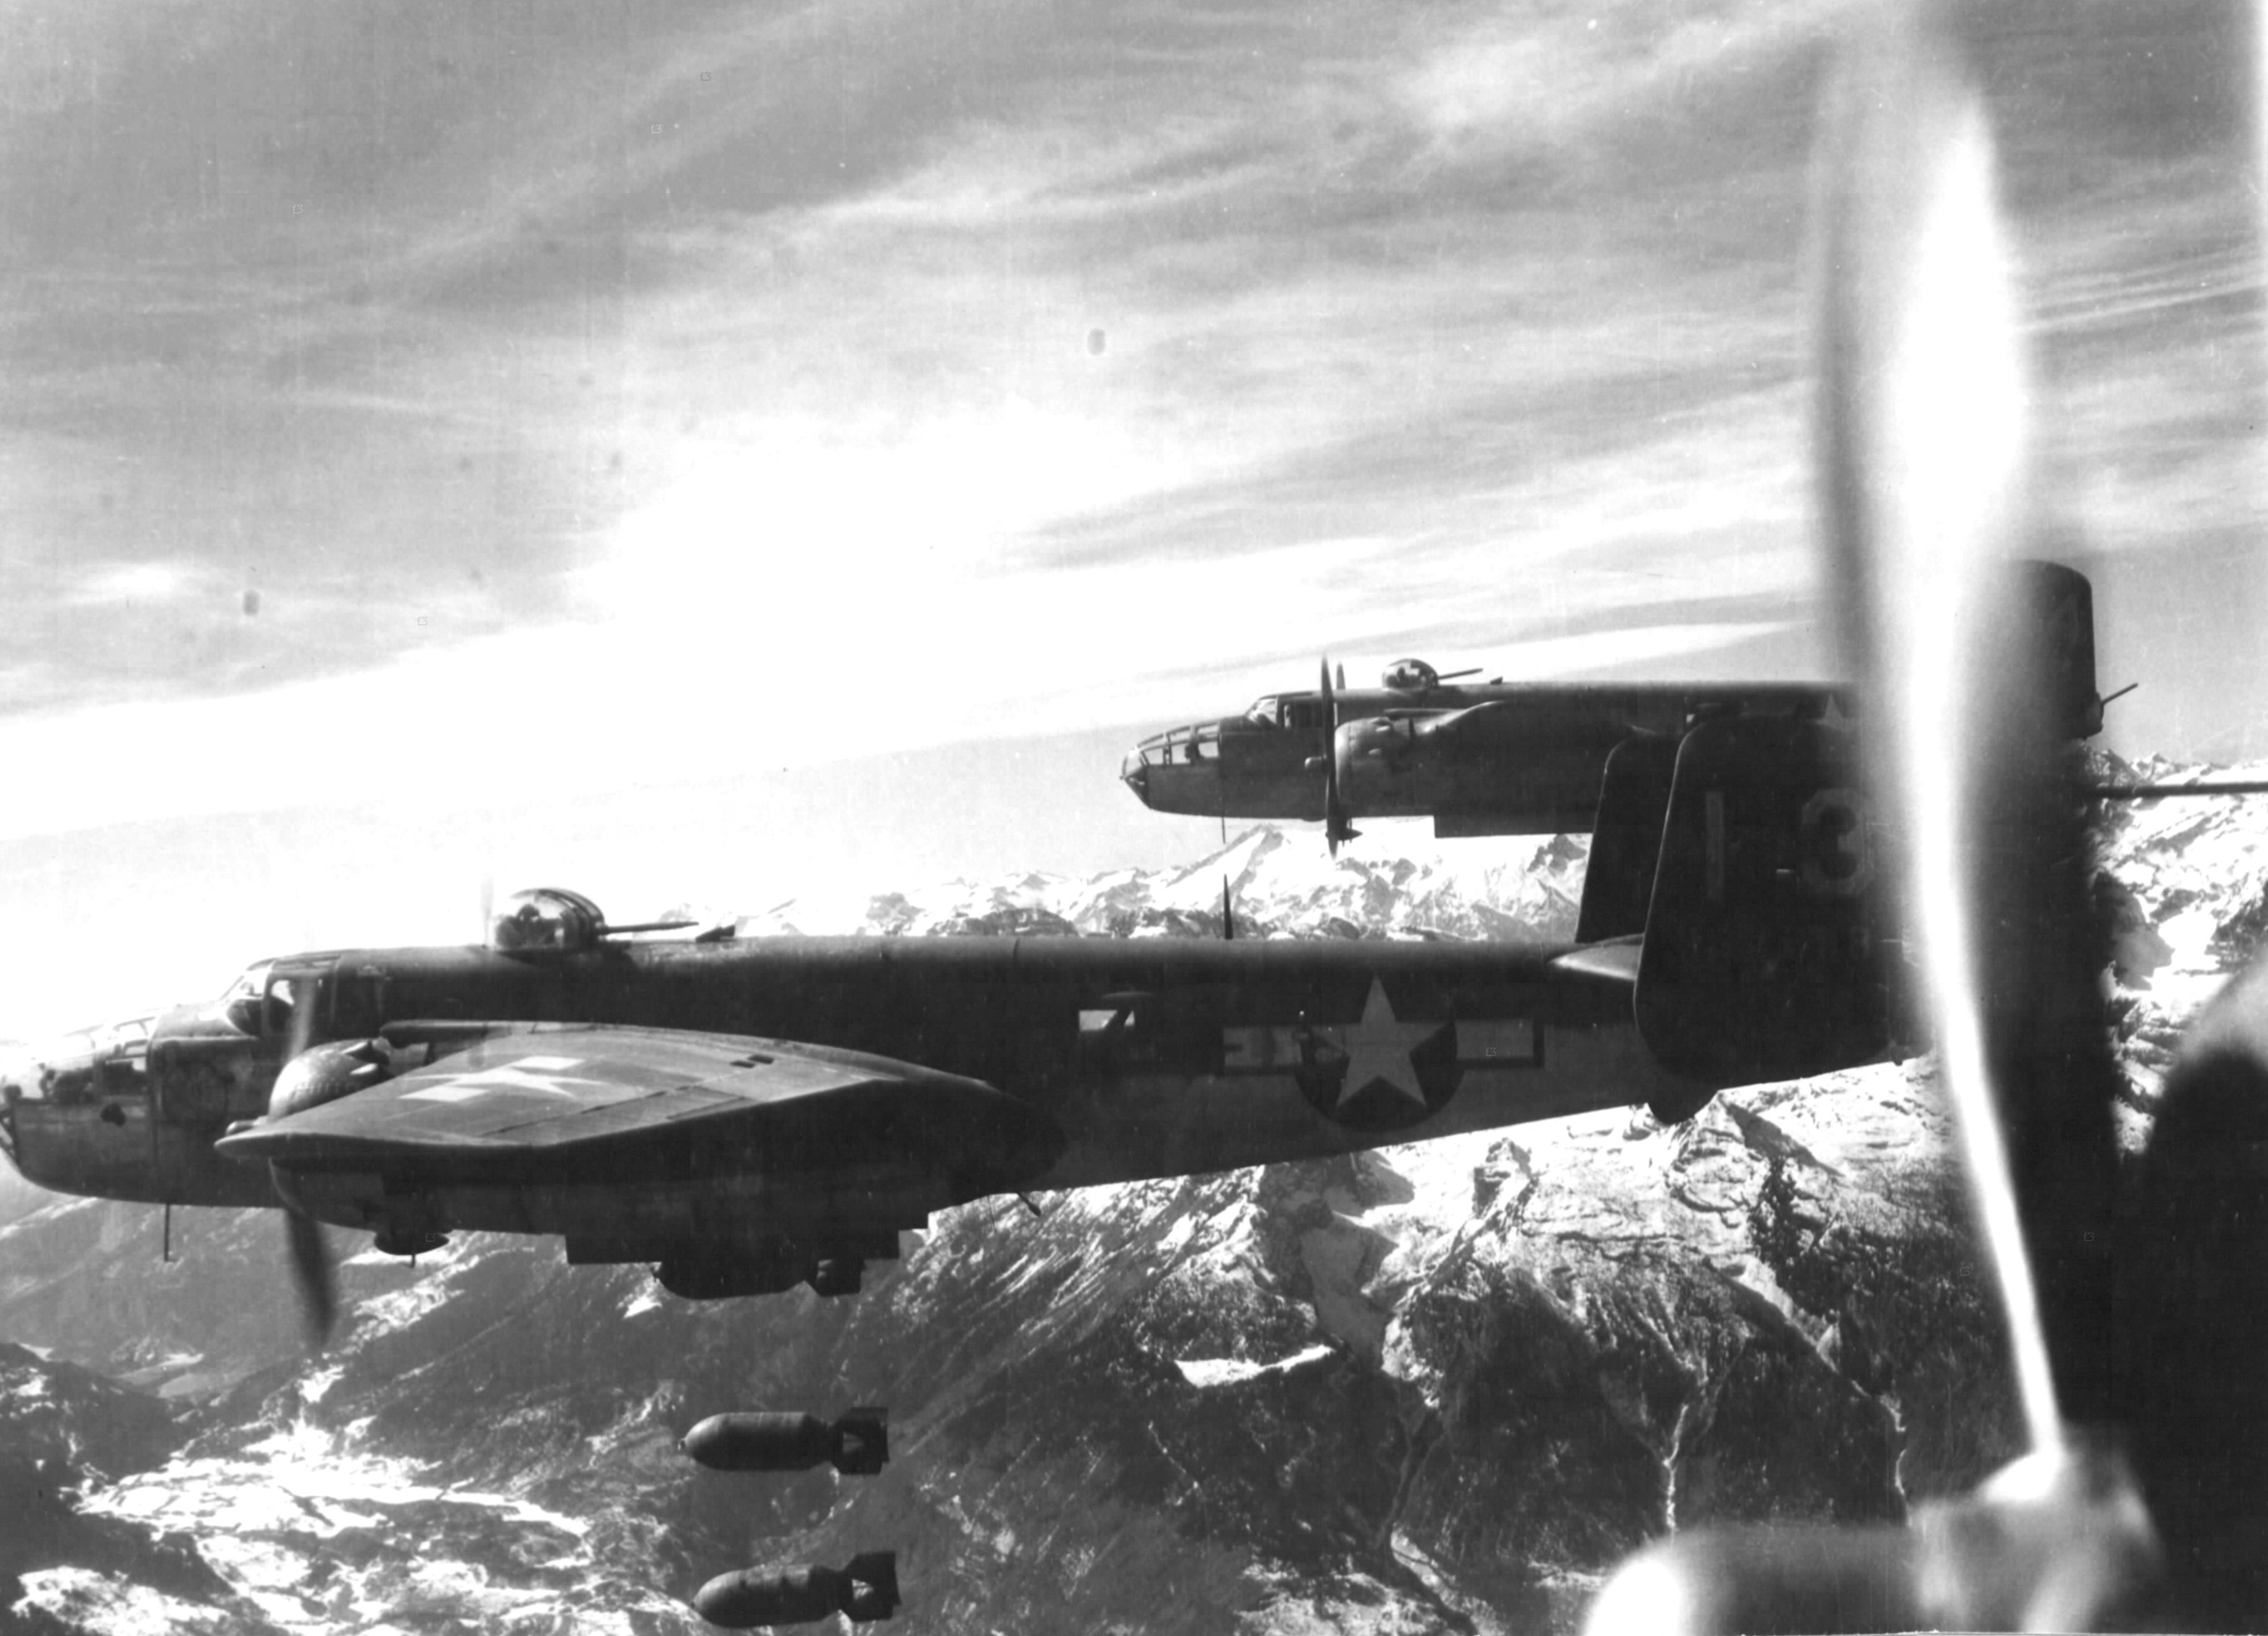 B-25 Mitchell bomber “Peggy Lou” and other B-25s of the 321st Bomb Group flying from Solenzara, Corsica bombing San Michele railroad bridge in the Brenner Pass region of northern Italy, 10 Mar 1945.